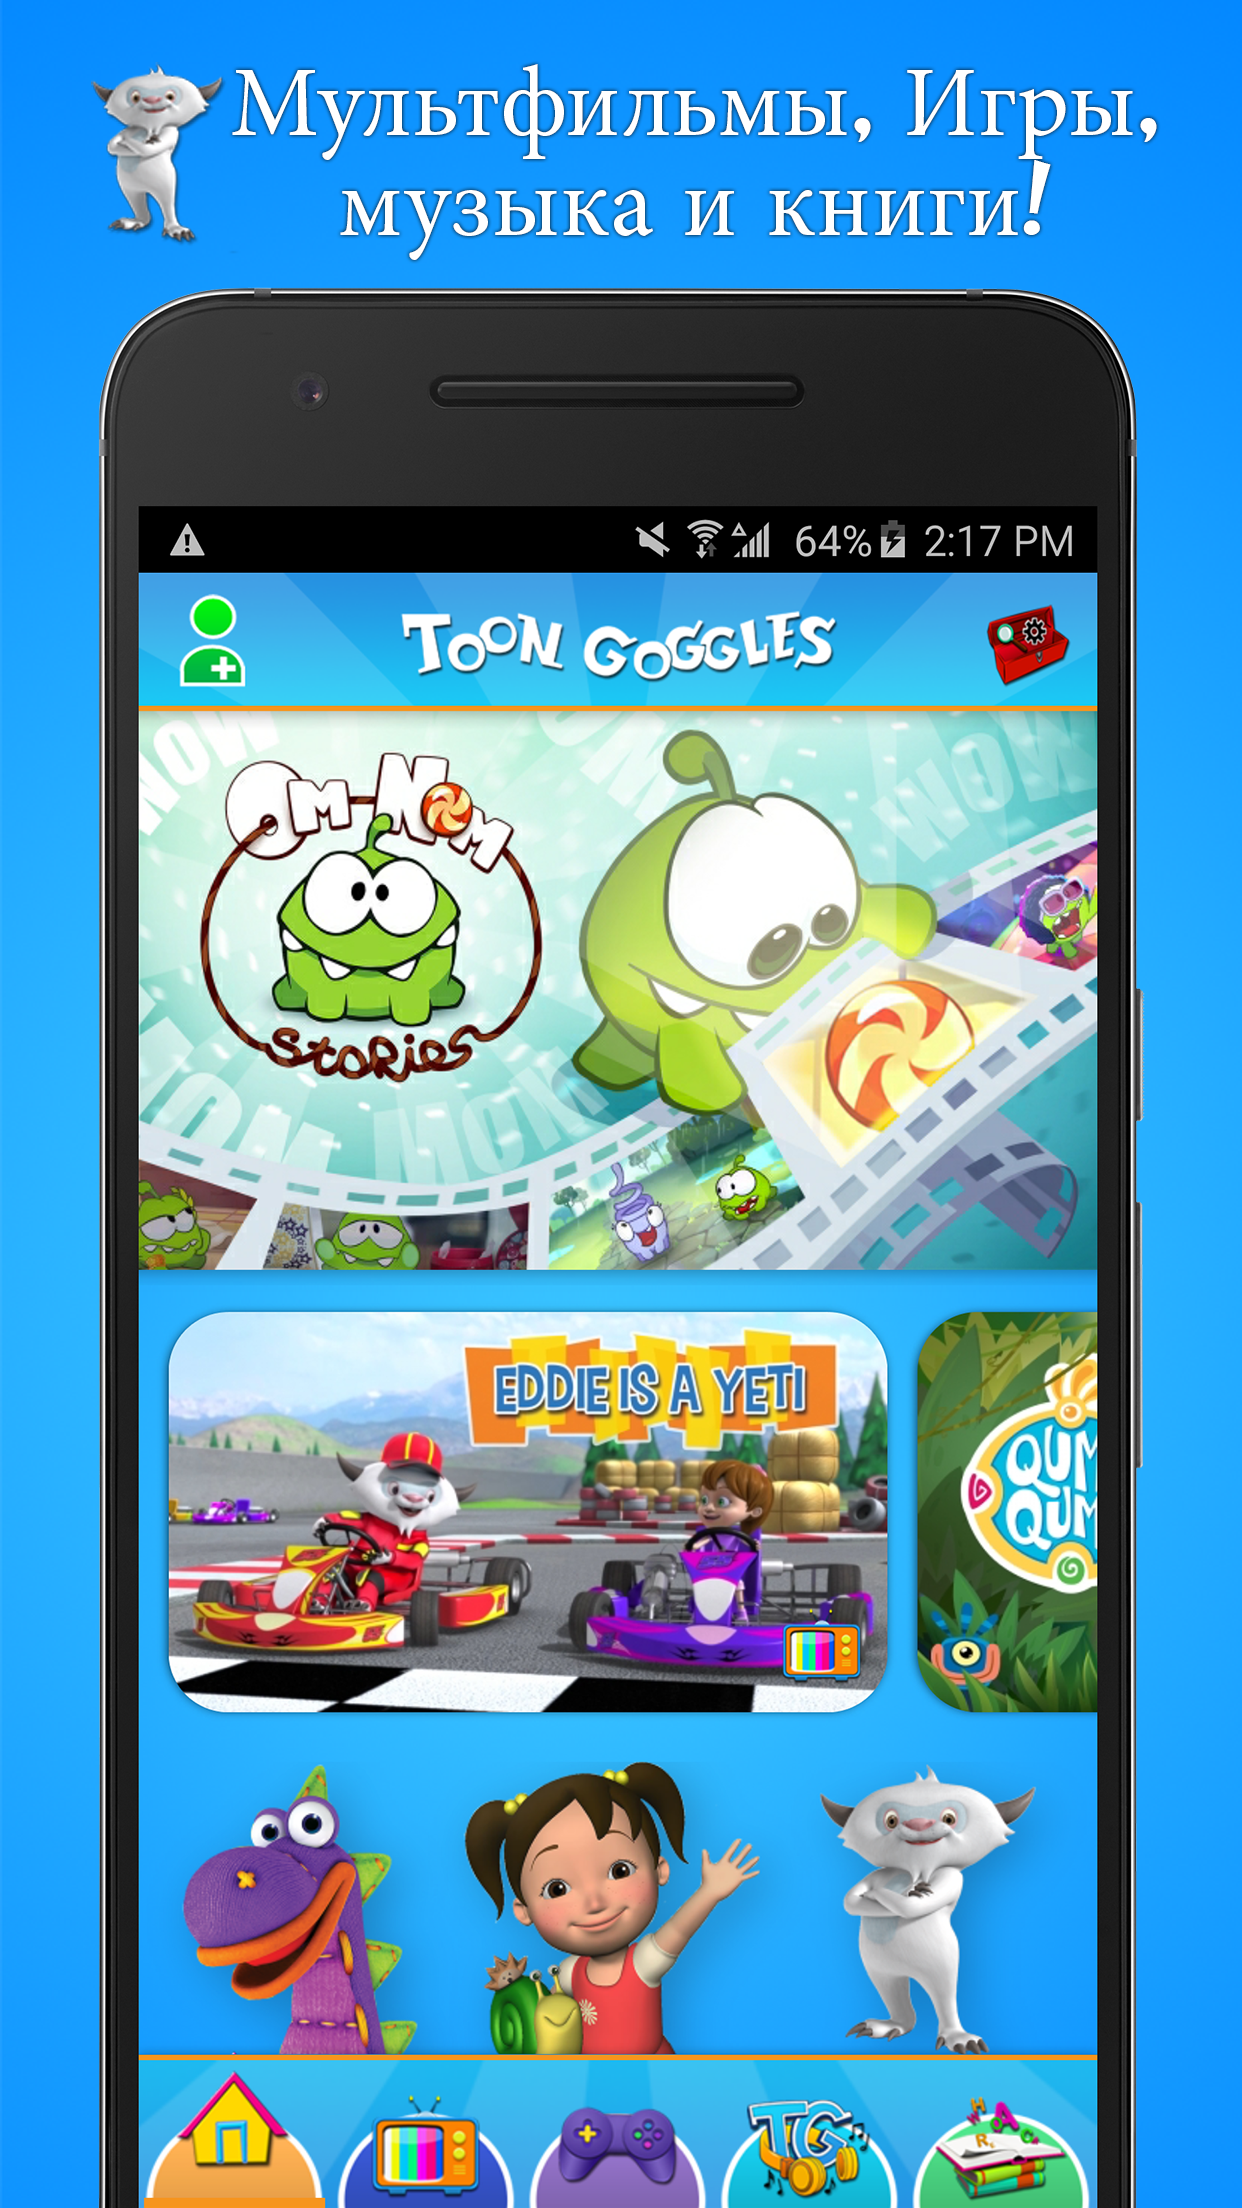 Android application Toon Goggles Cartoons for Kids screenshort